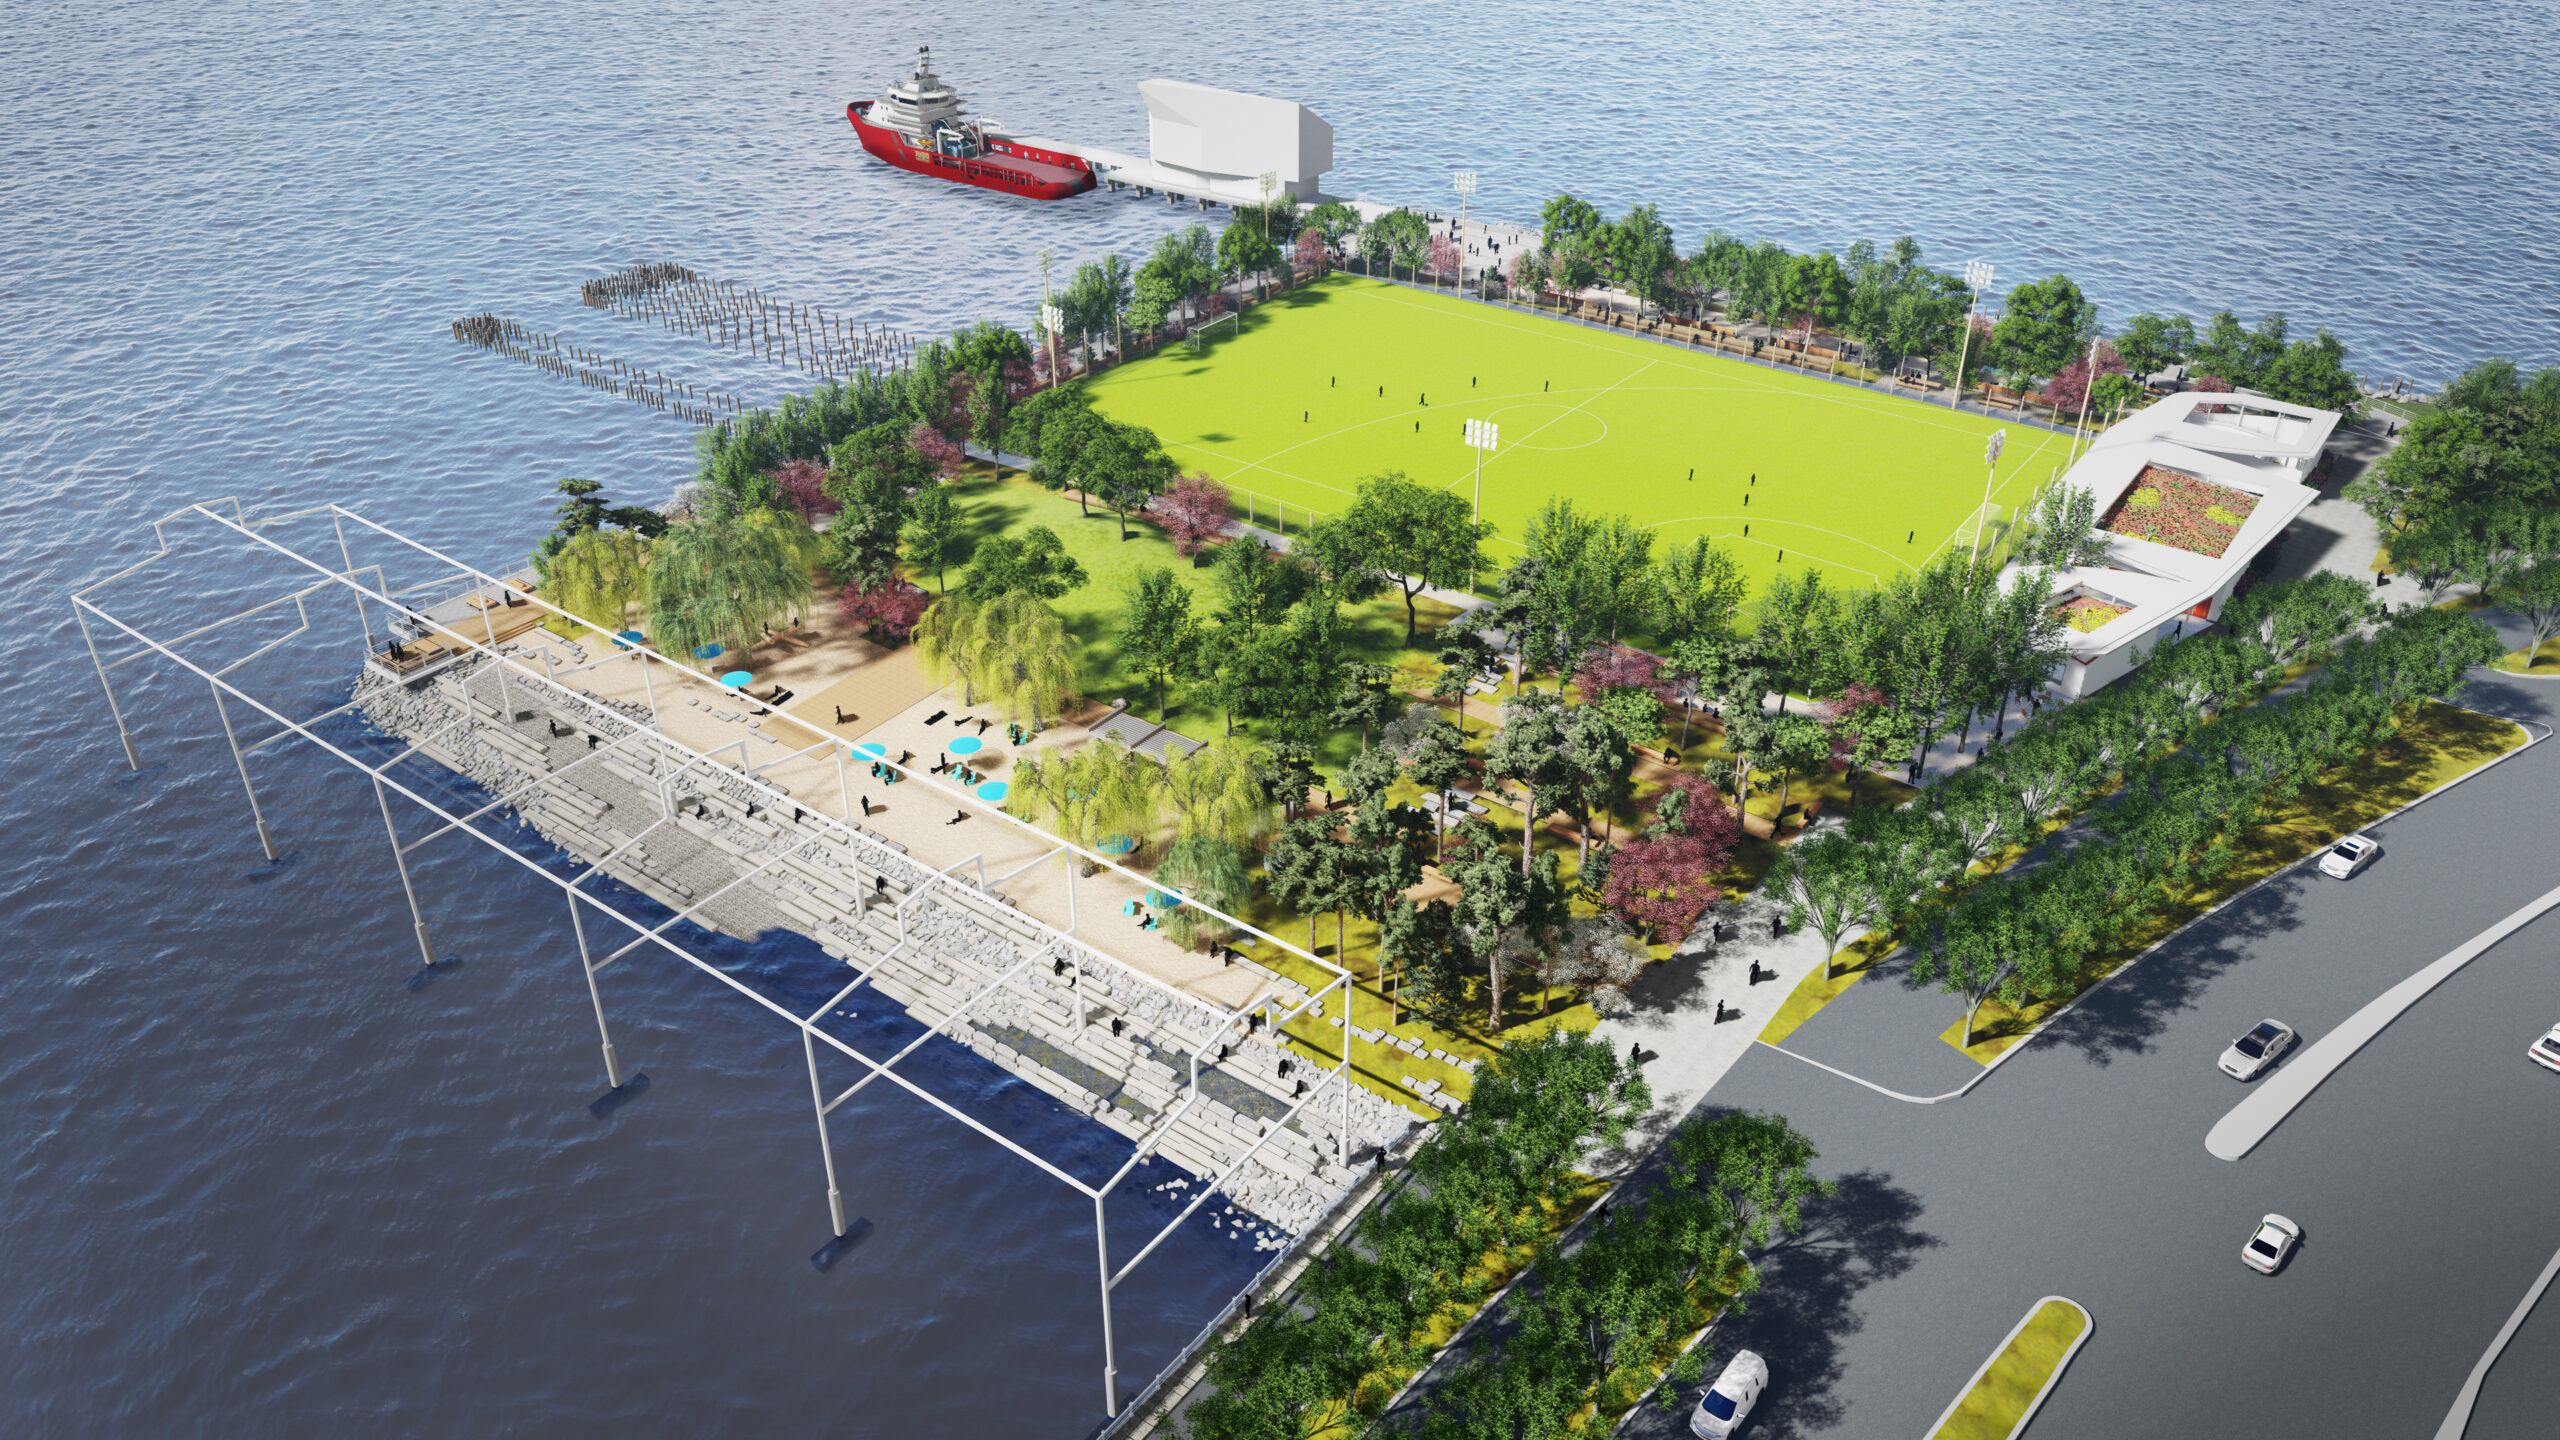 Aerial view of the planned layout of Hudson River Park's Gansevoort Peninsula, featuring a grass sports field and a beach.